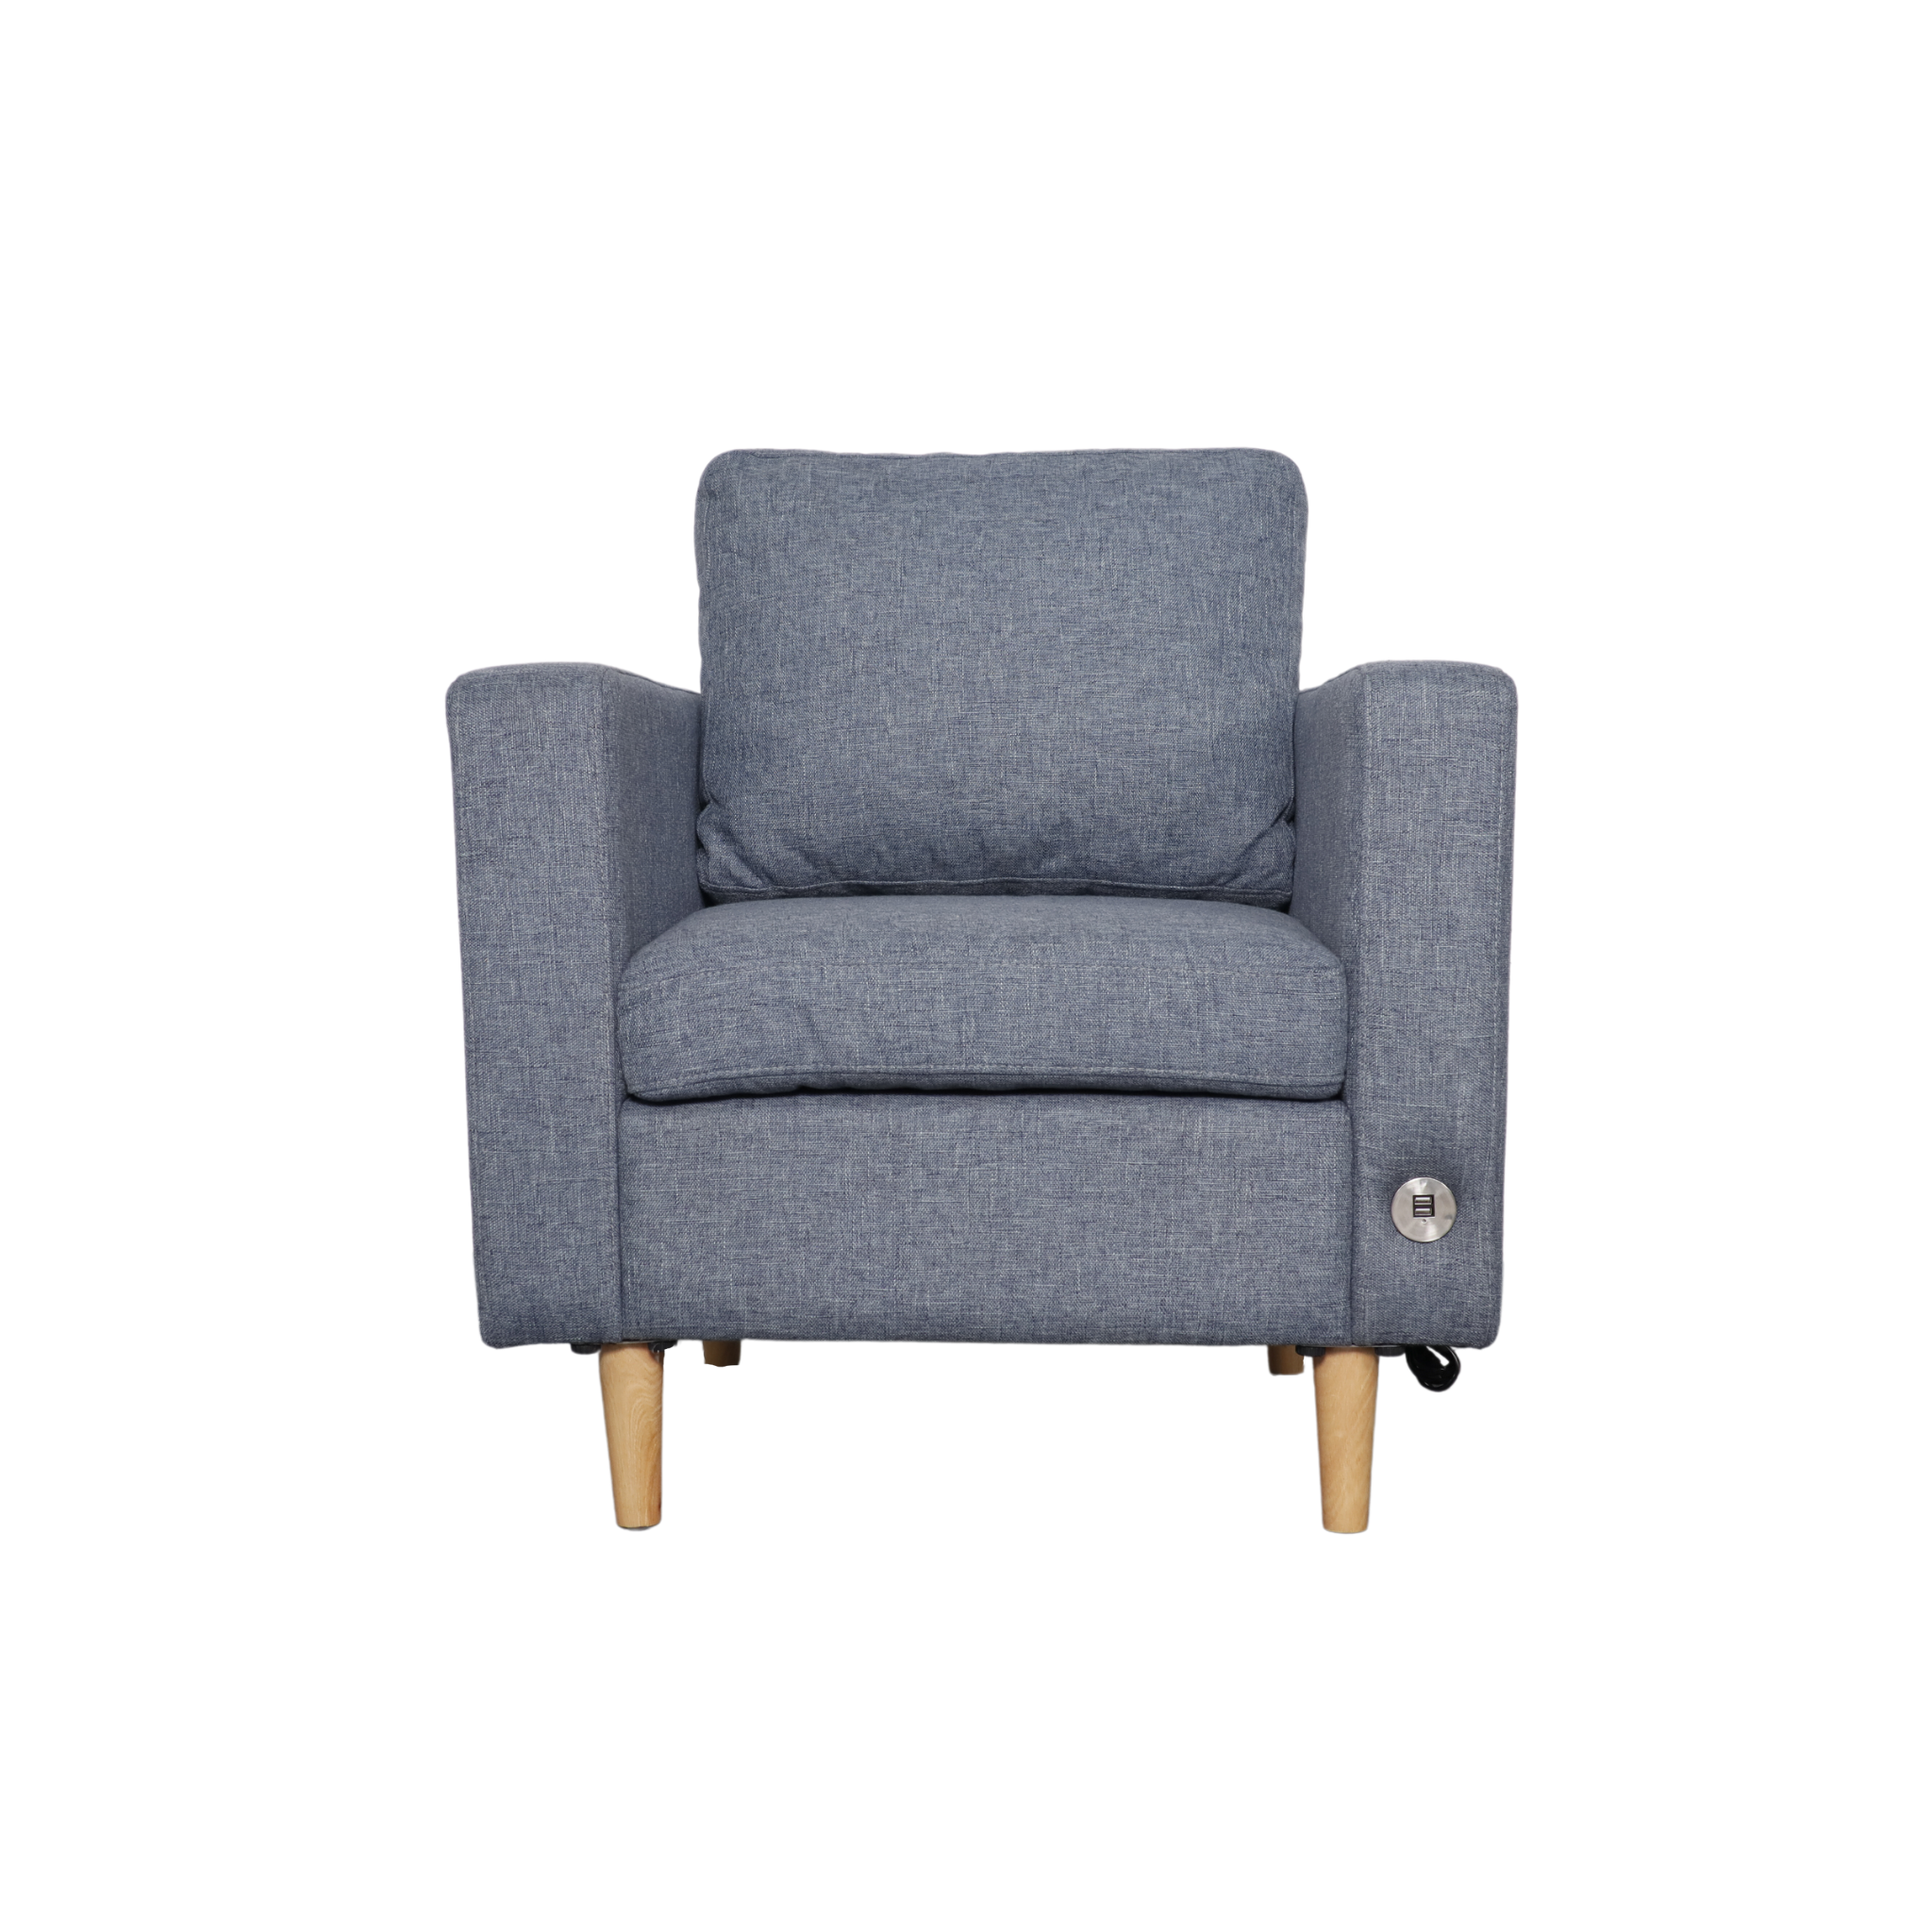 Tinker - Cocoon Series 1-Seater Fabric Sofa AF Home